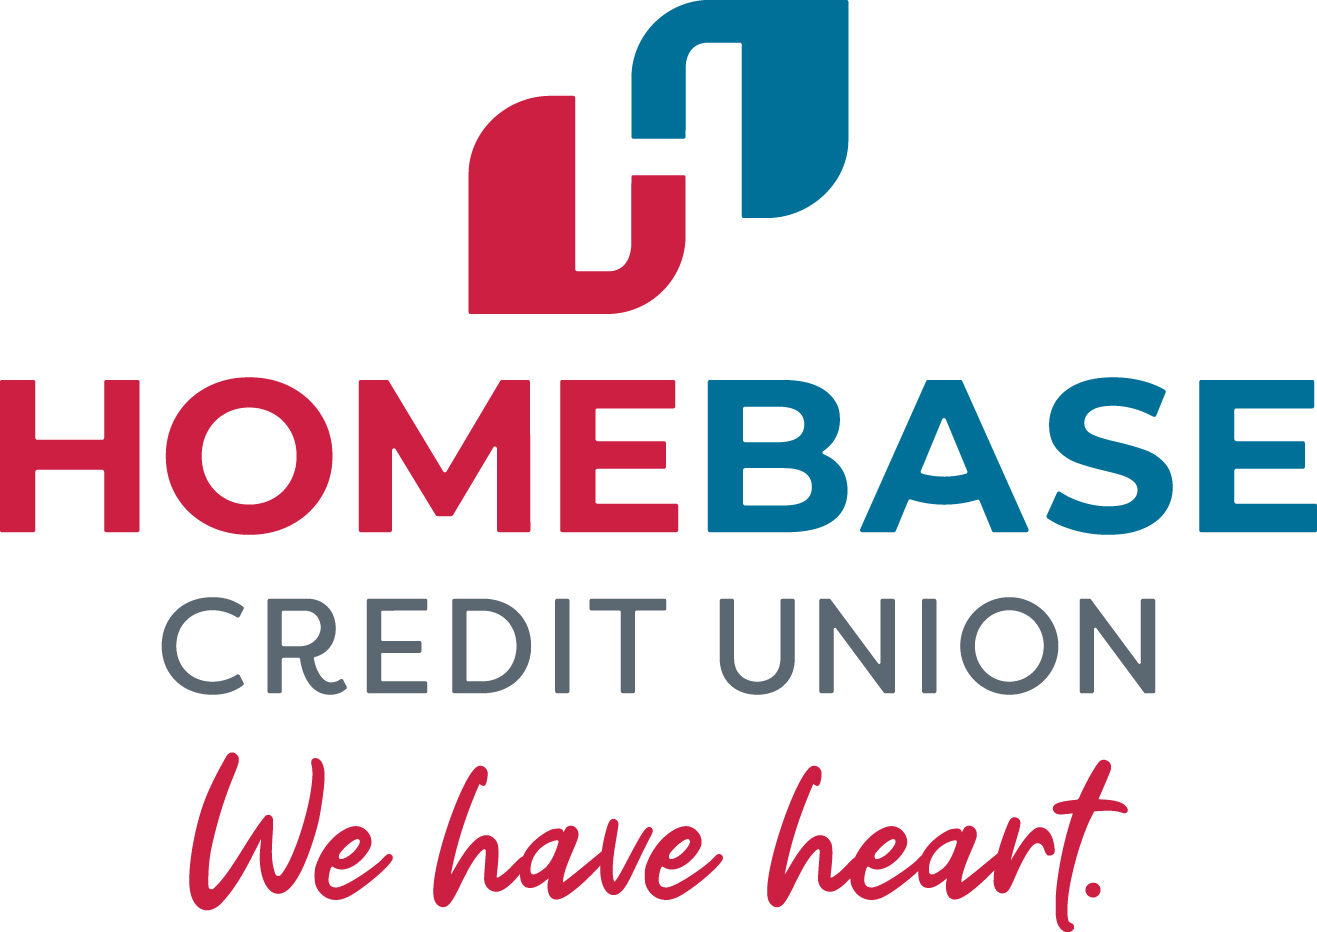 Homebase Credit Union. We have heart.